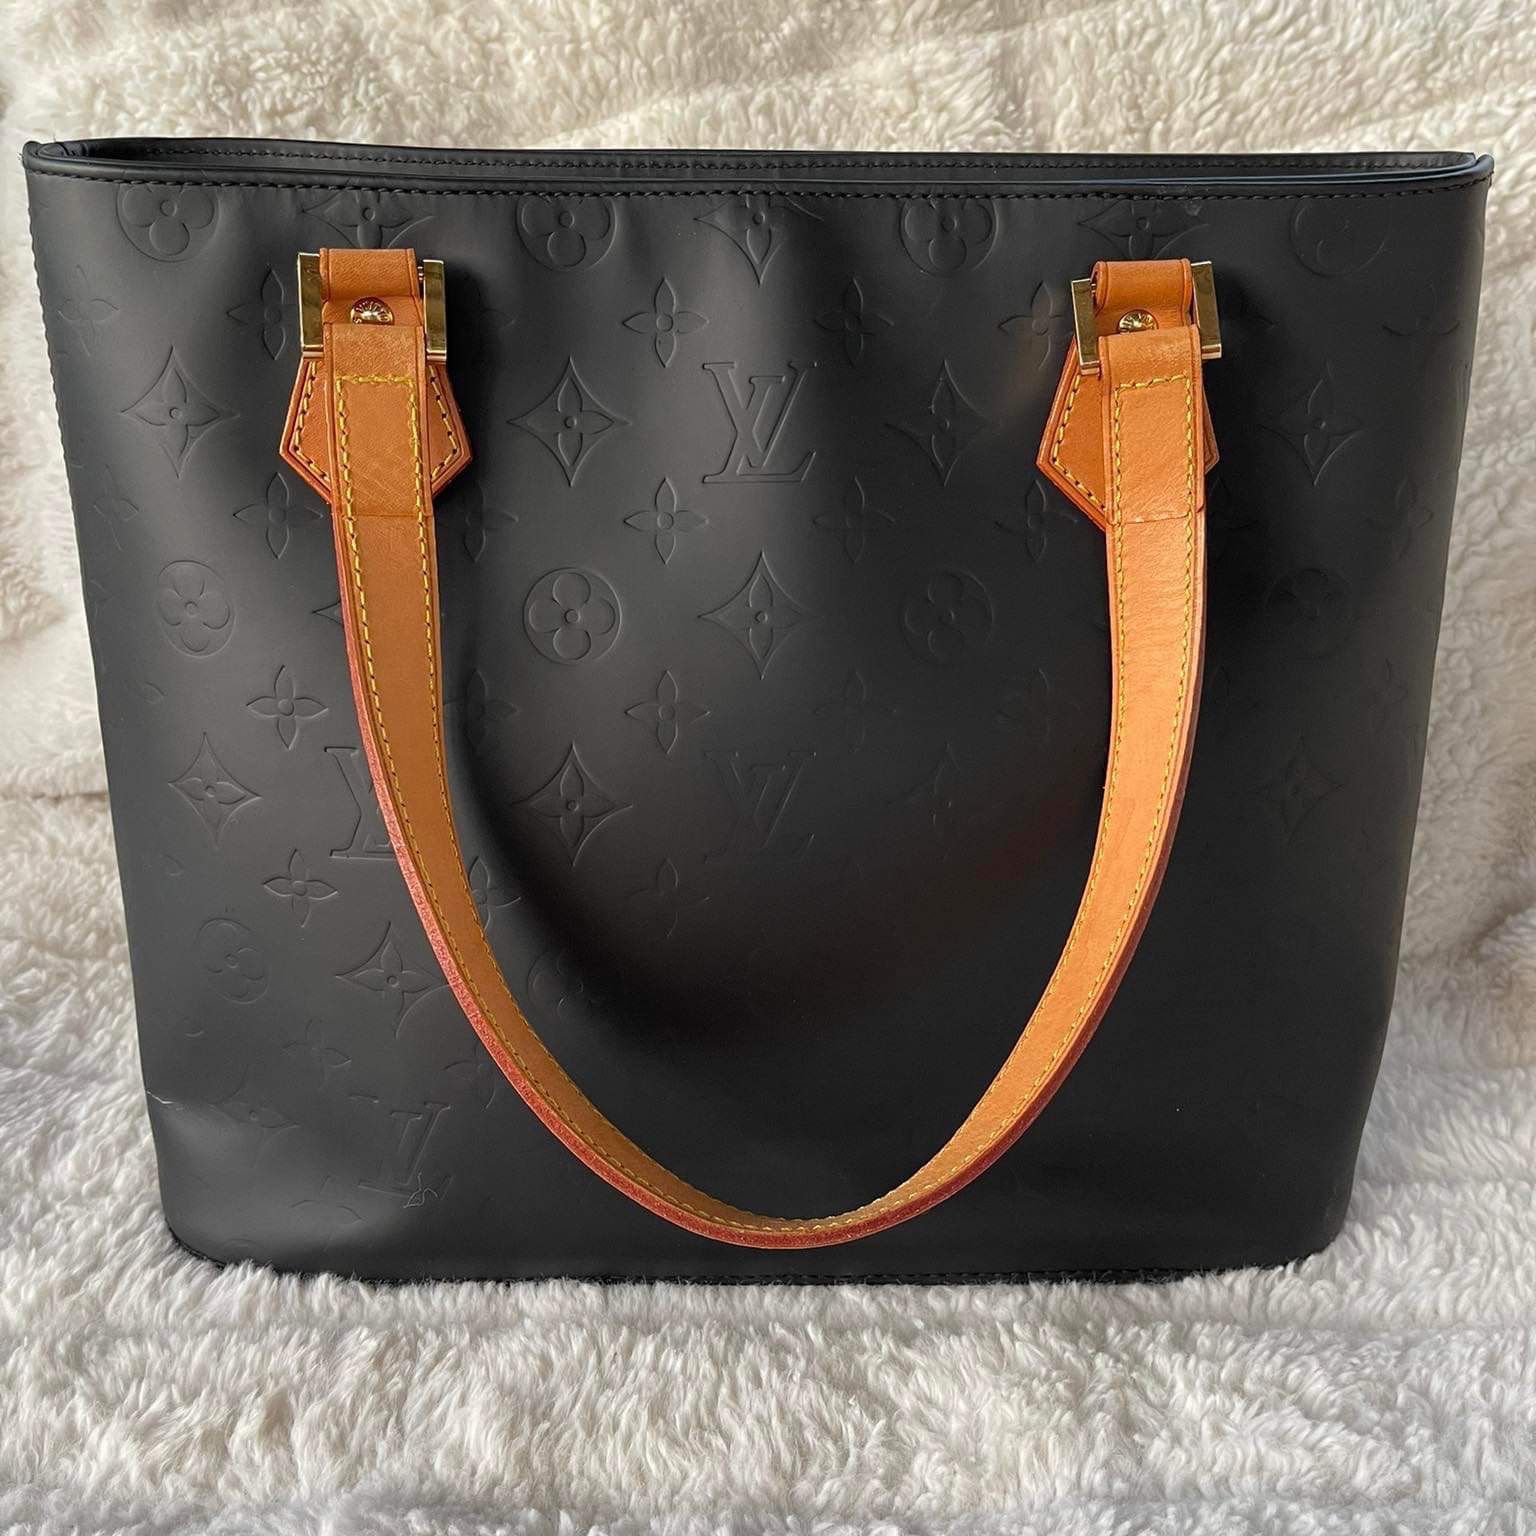 Louis Vuitton Monogram Vernis Rosewood Avenue for Sale in Averill Park, NY  - OfferUp